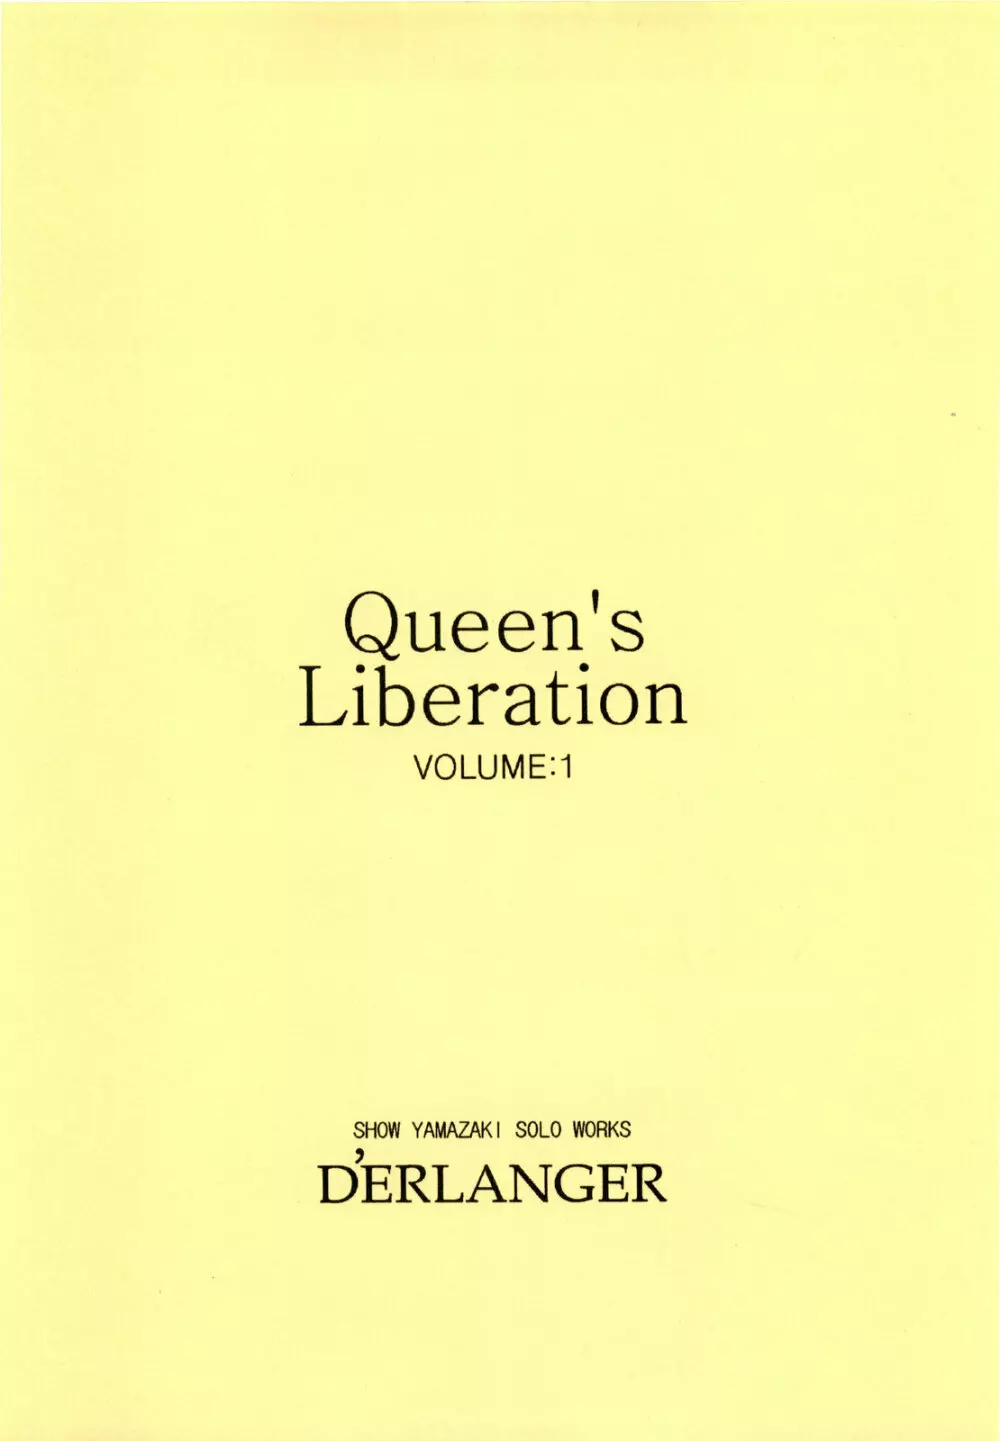 Queen's Liberation VOLUME 1 Page.20